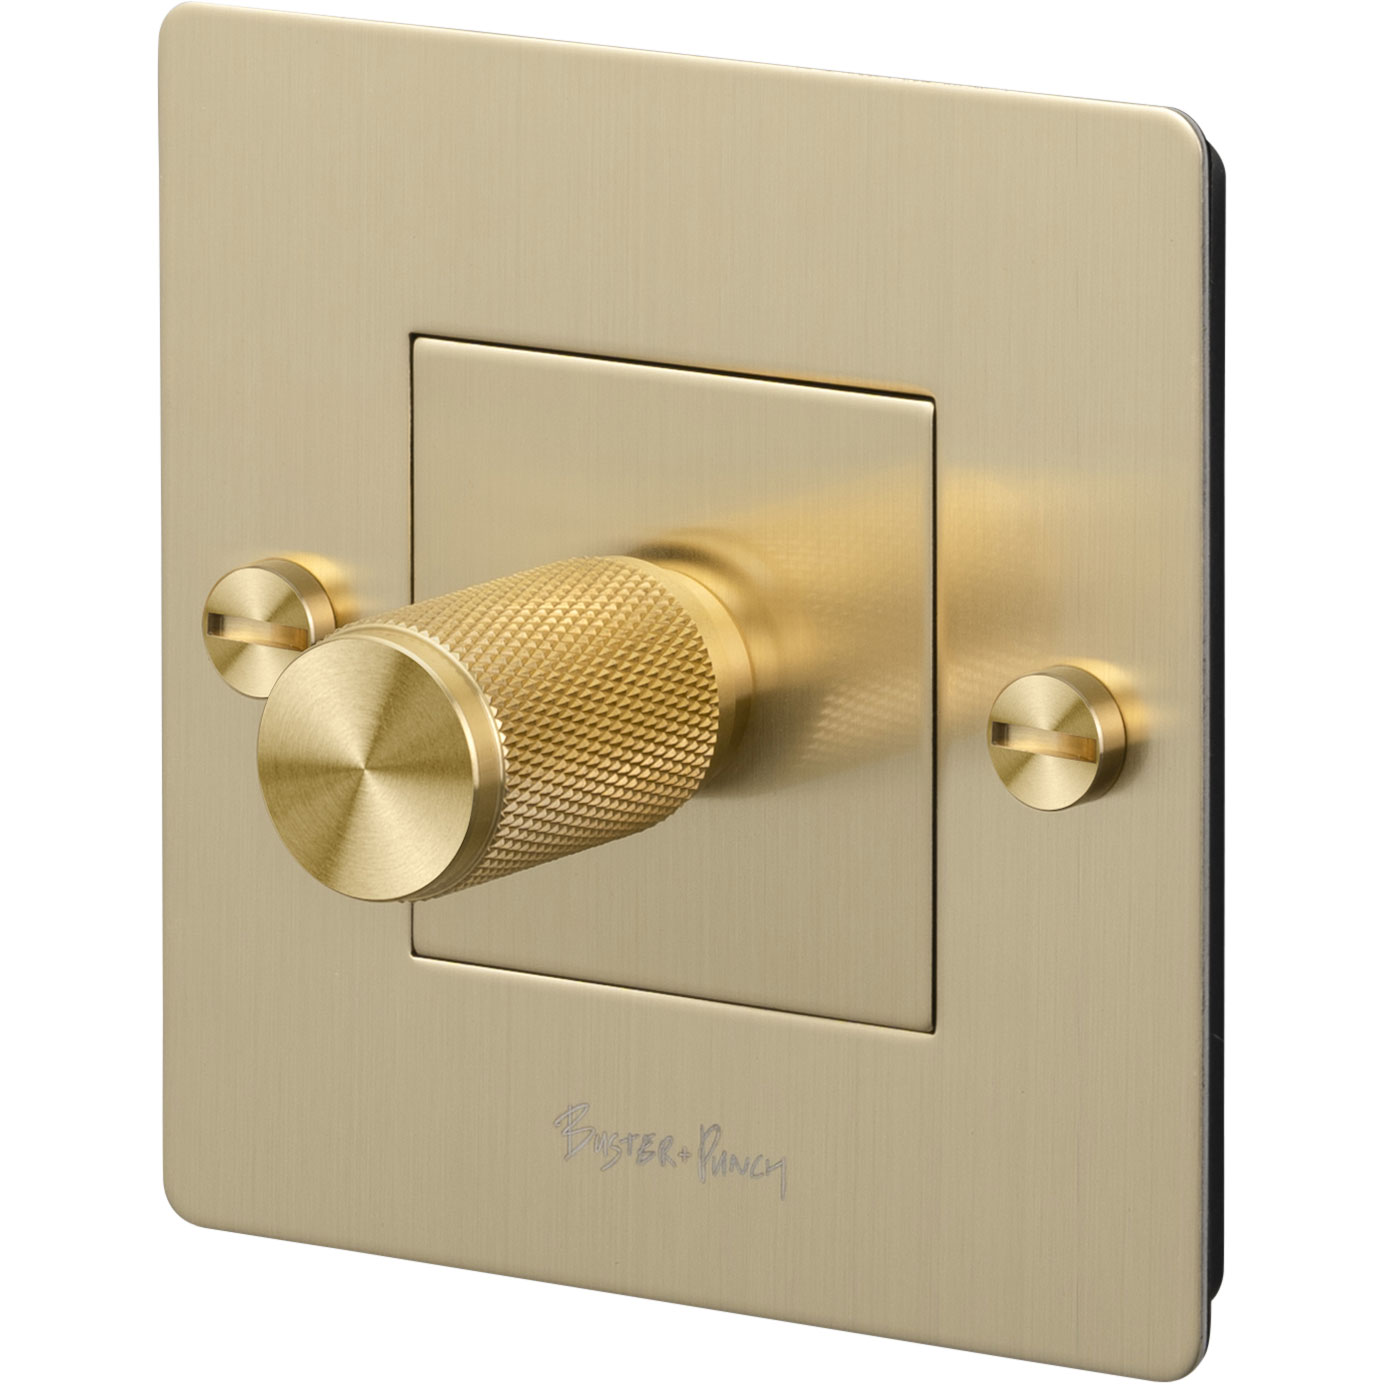 Buster + Punch 1G Dimmer Switch 2 Way 100W LED, Brass Messing Metall